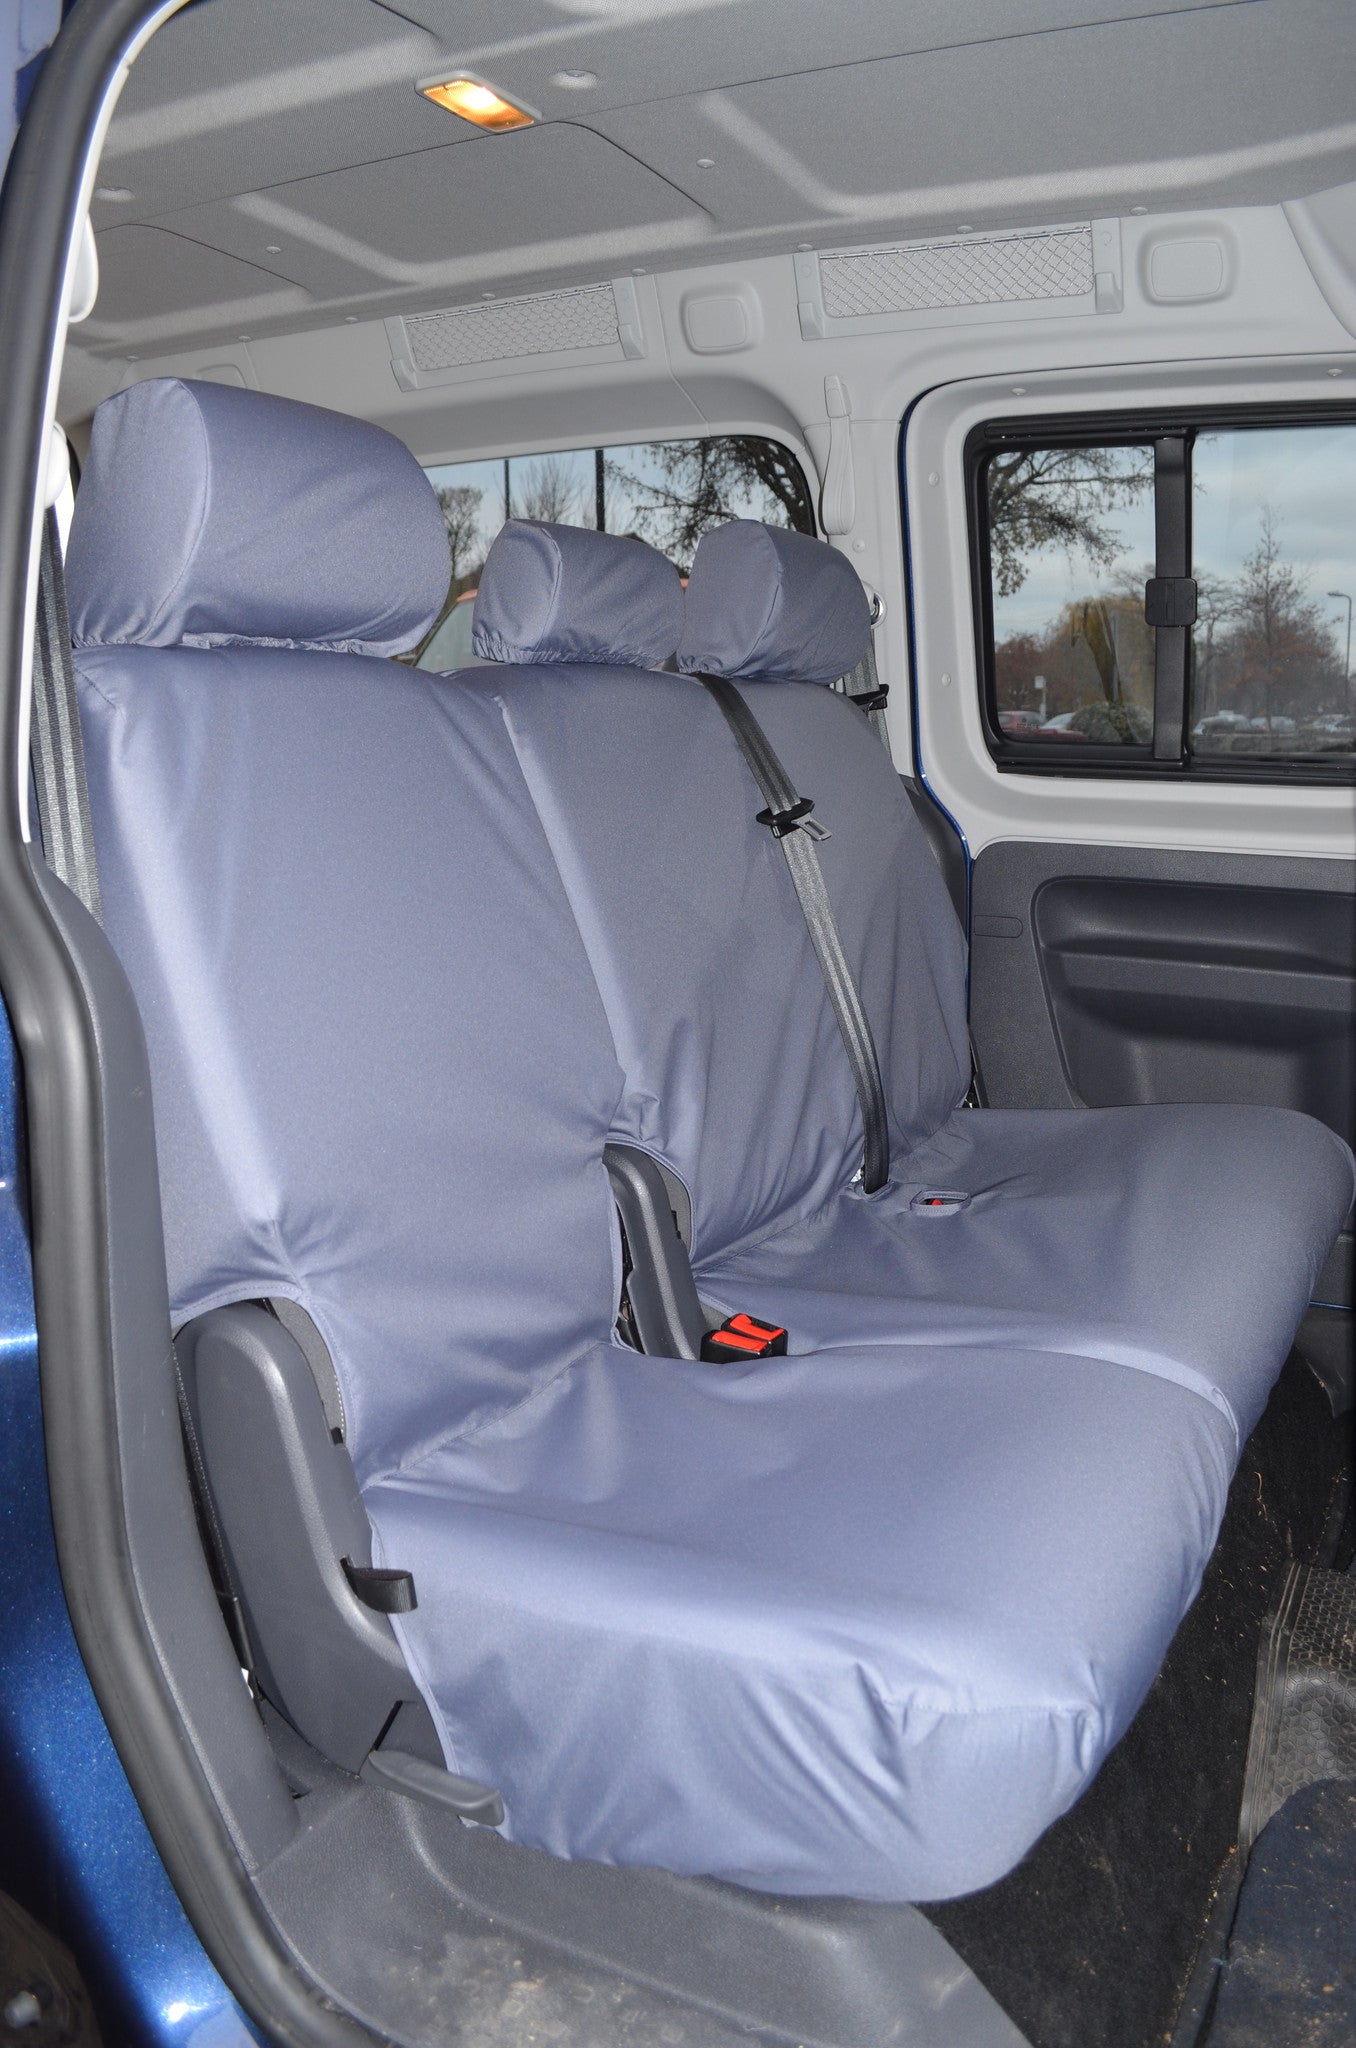 Volkswagen Caddy 2004 Onwards Seat Covers 2nd Row Single &amp; Double Seats / Grey Turtle Covers Ltd